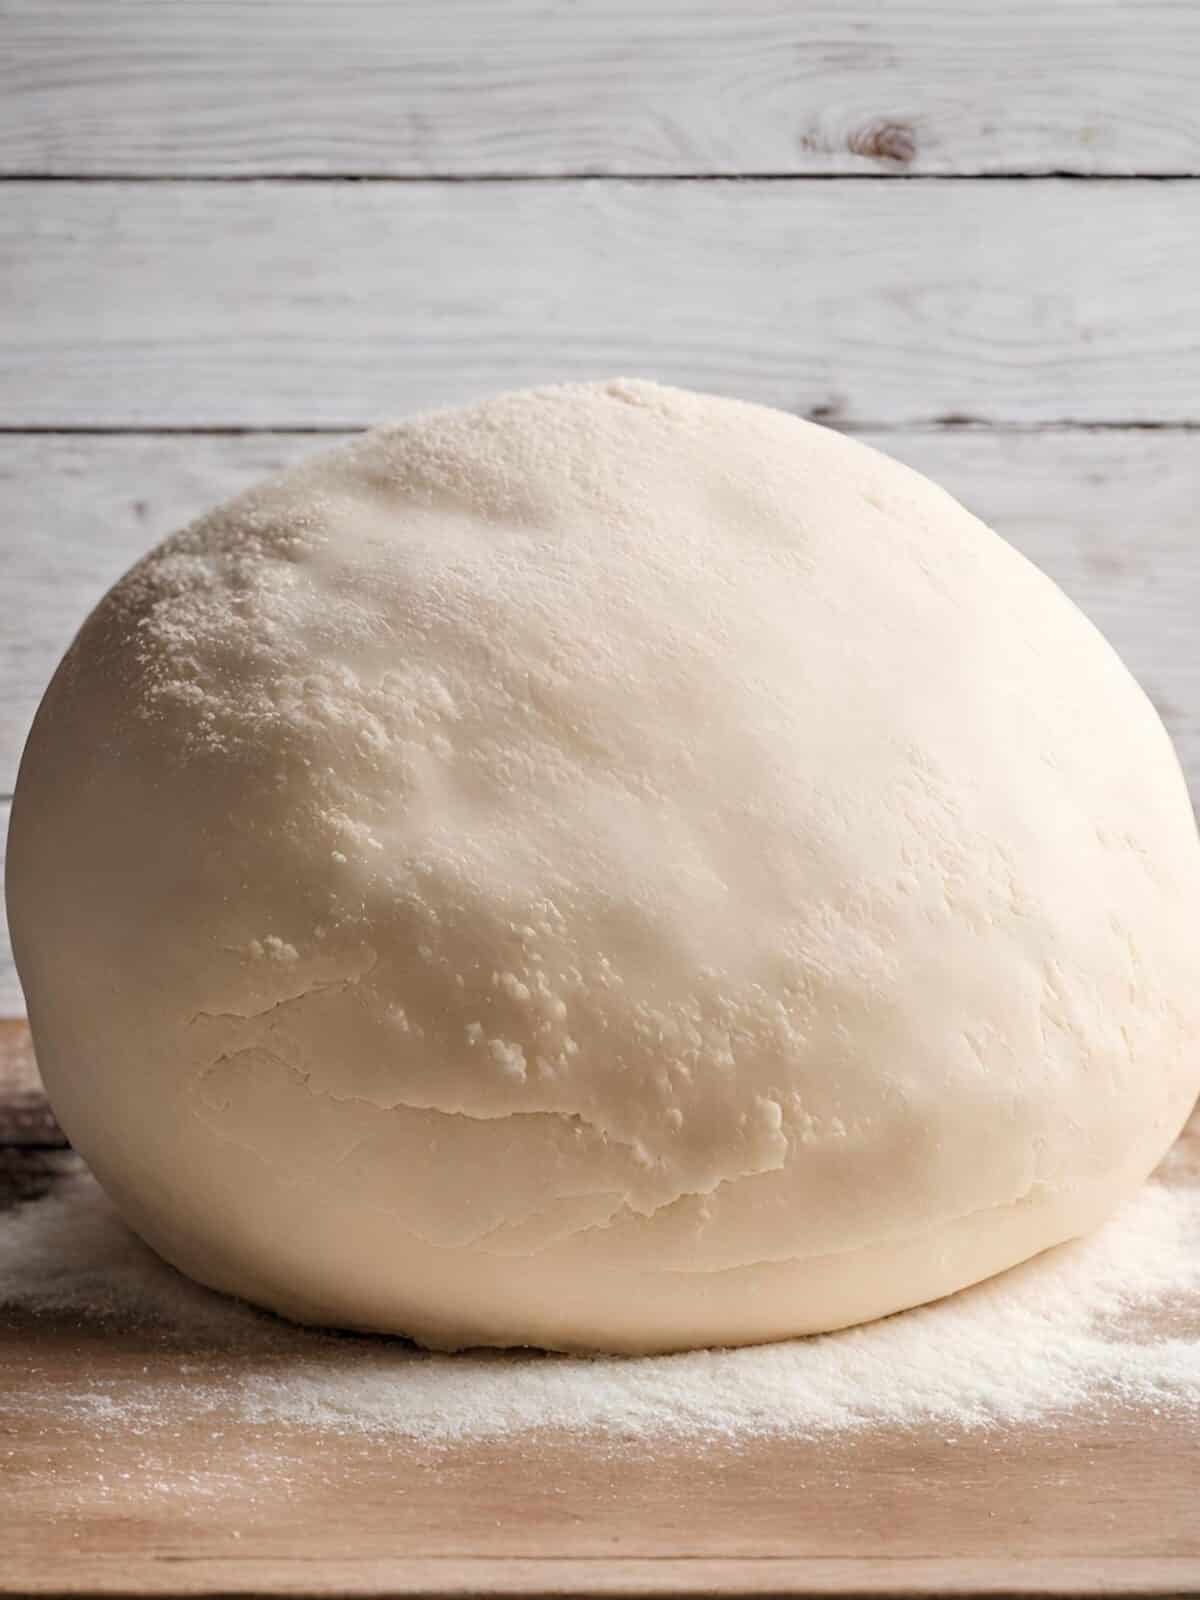 Make ahead pizza dough on a wooden table.